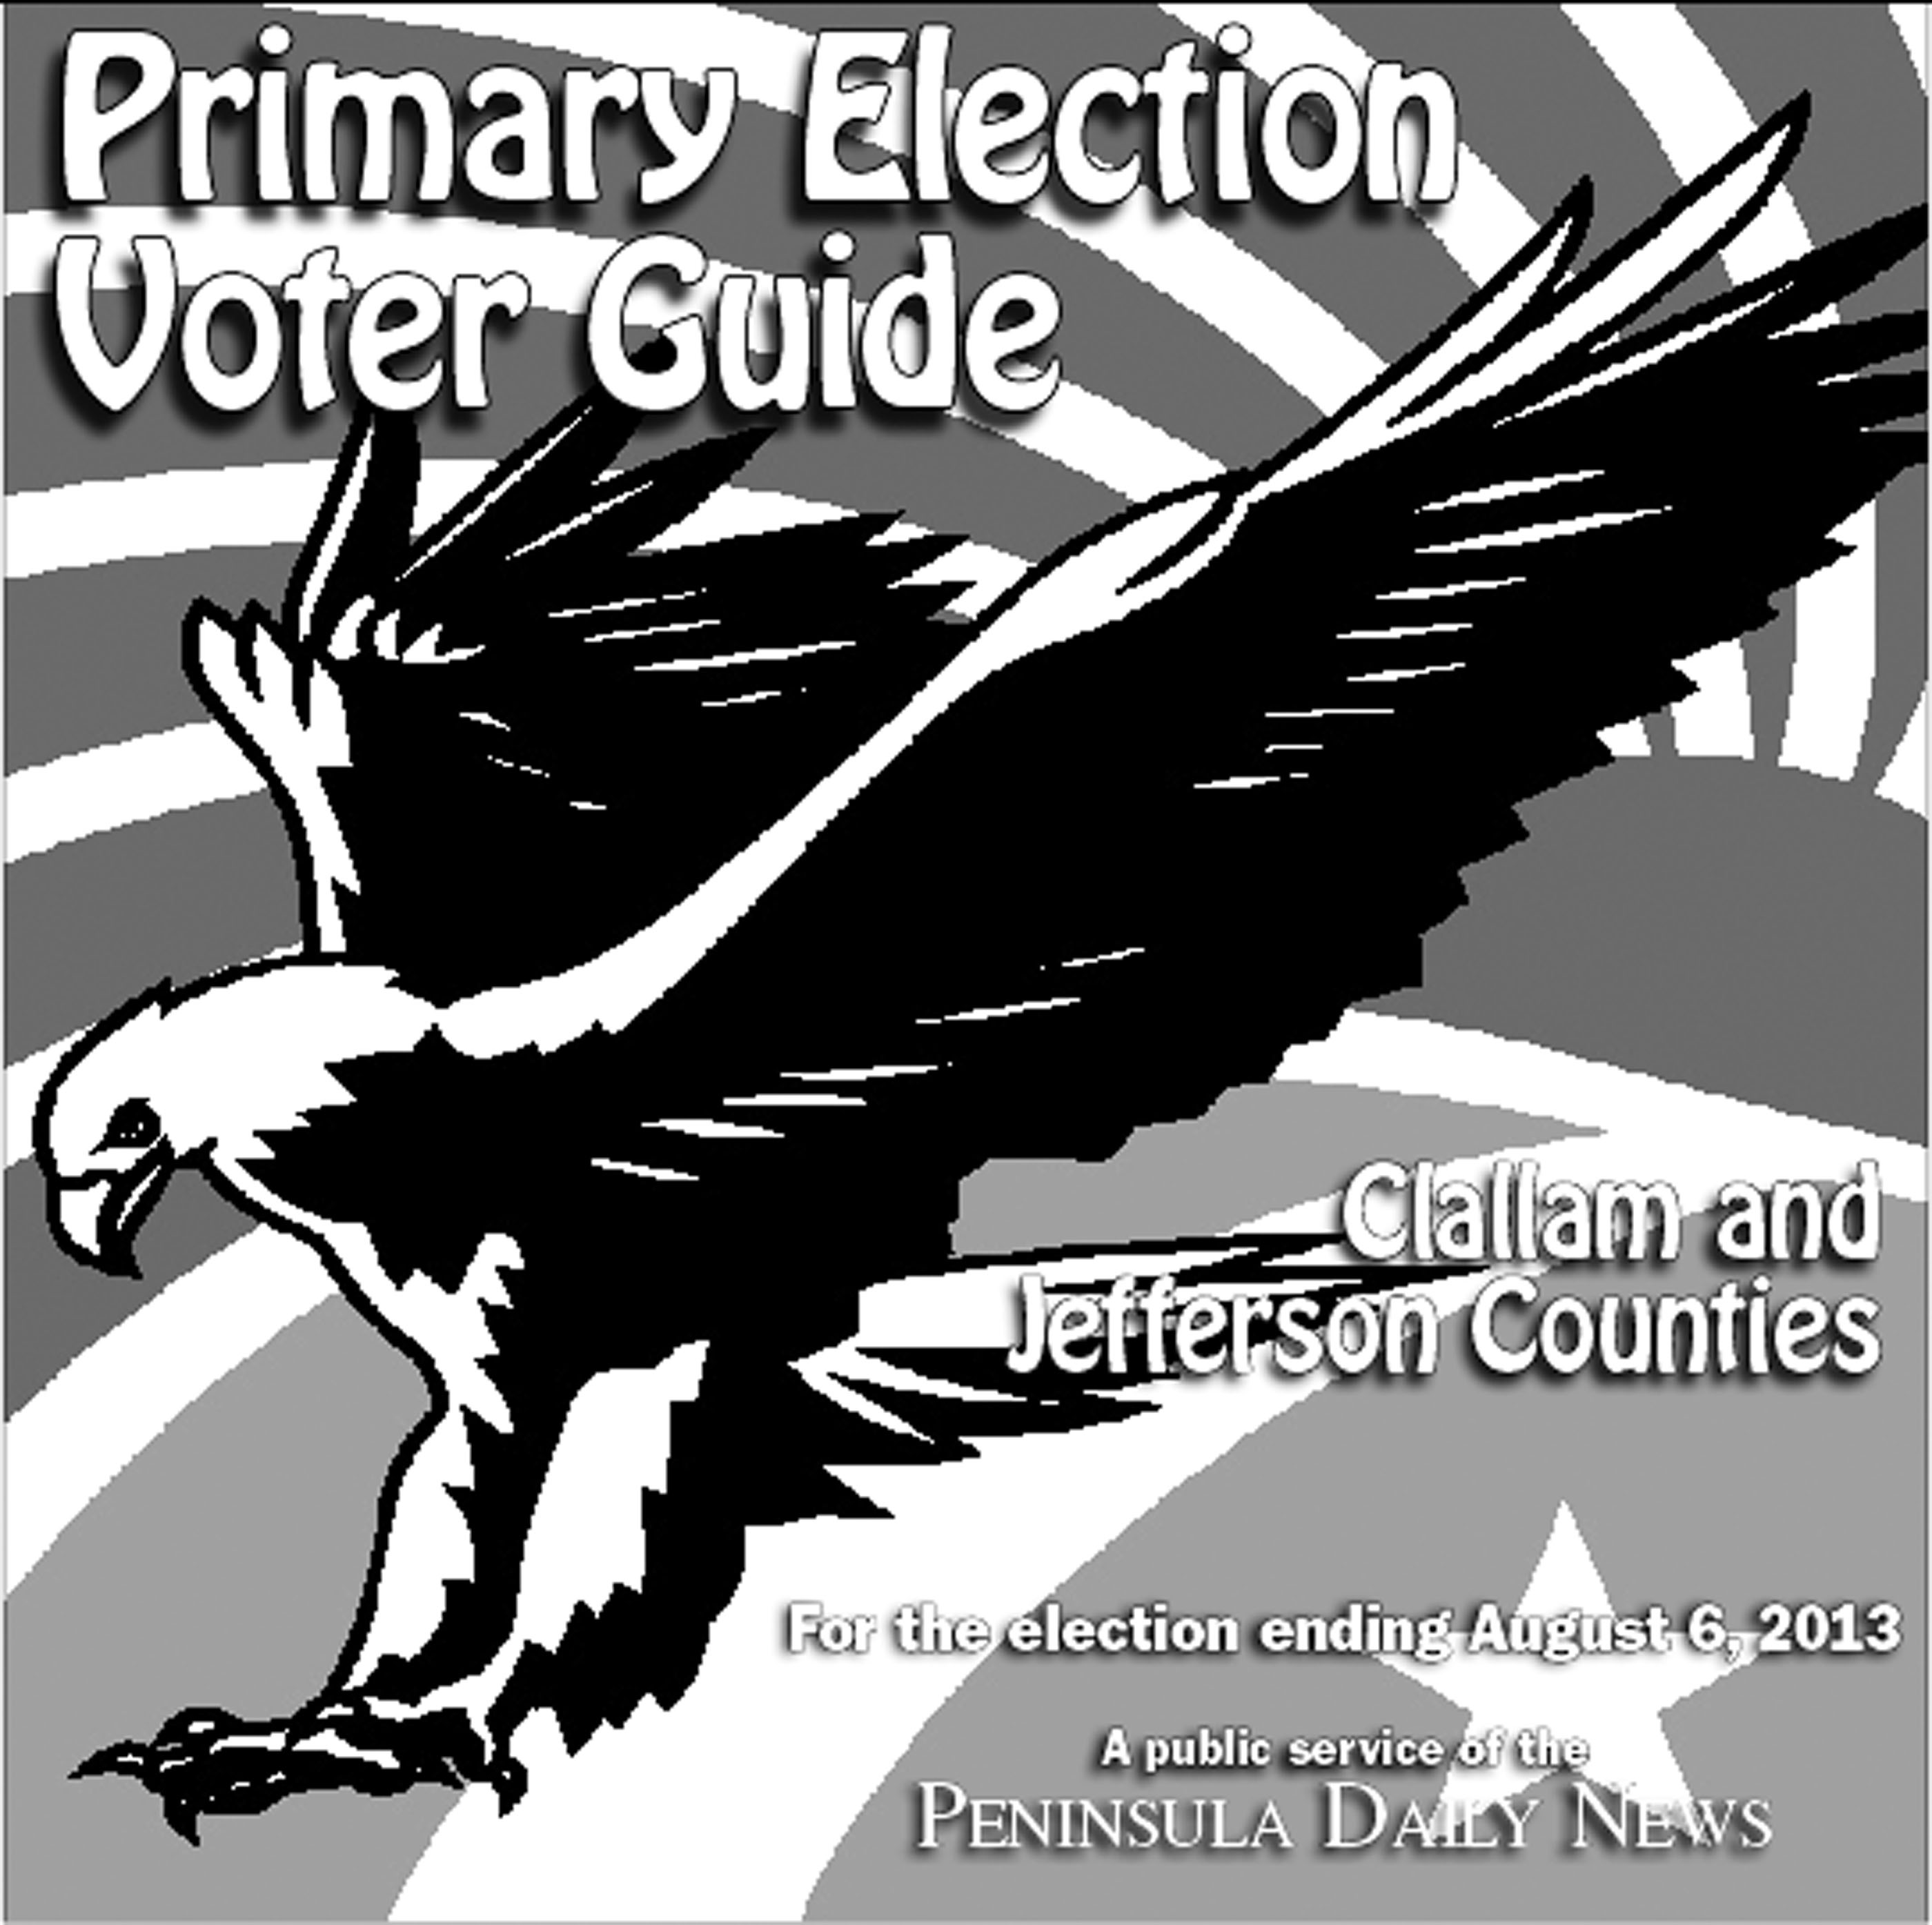 Final week to vote: North Olympic Peninsula Primary Election Voter Guide available to help